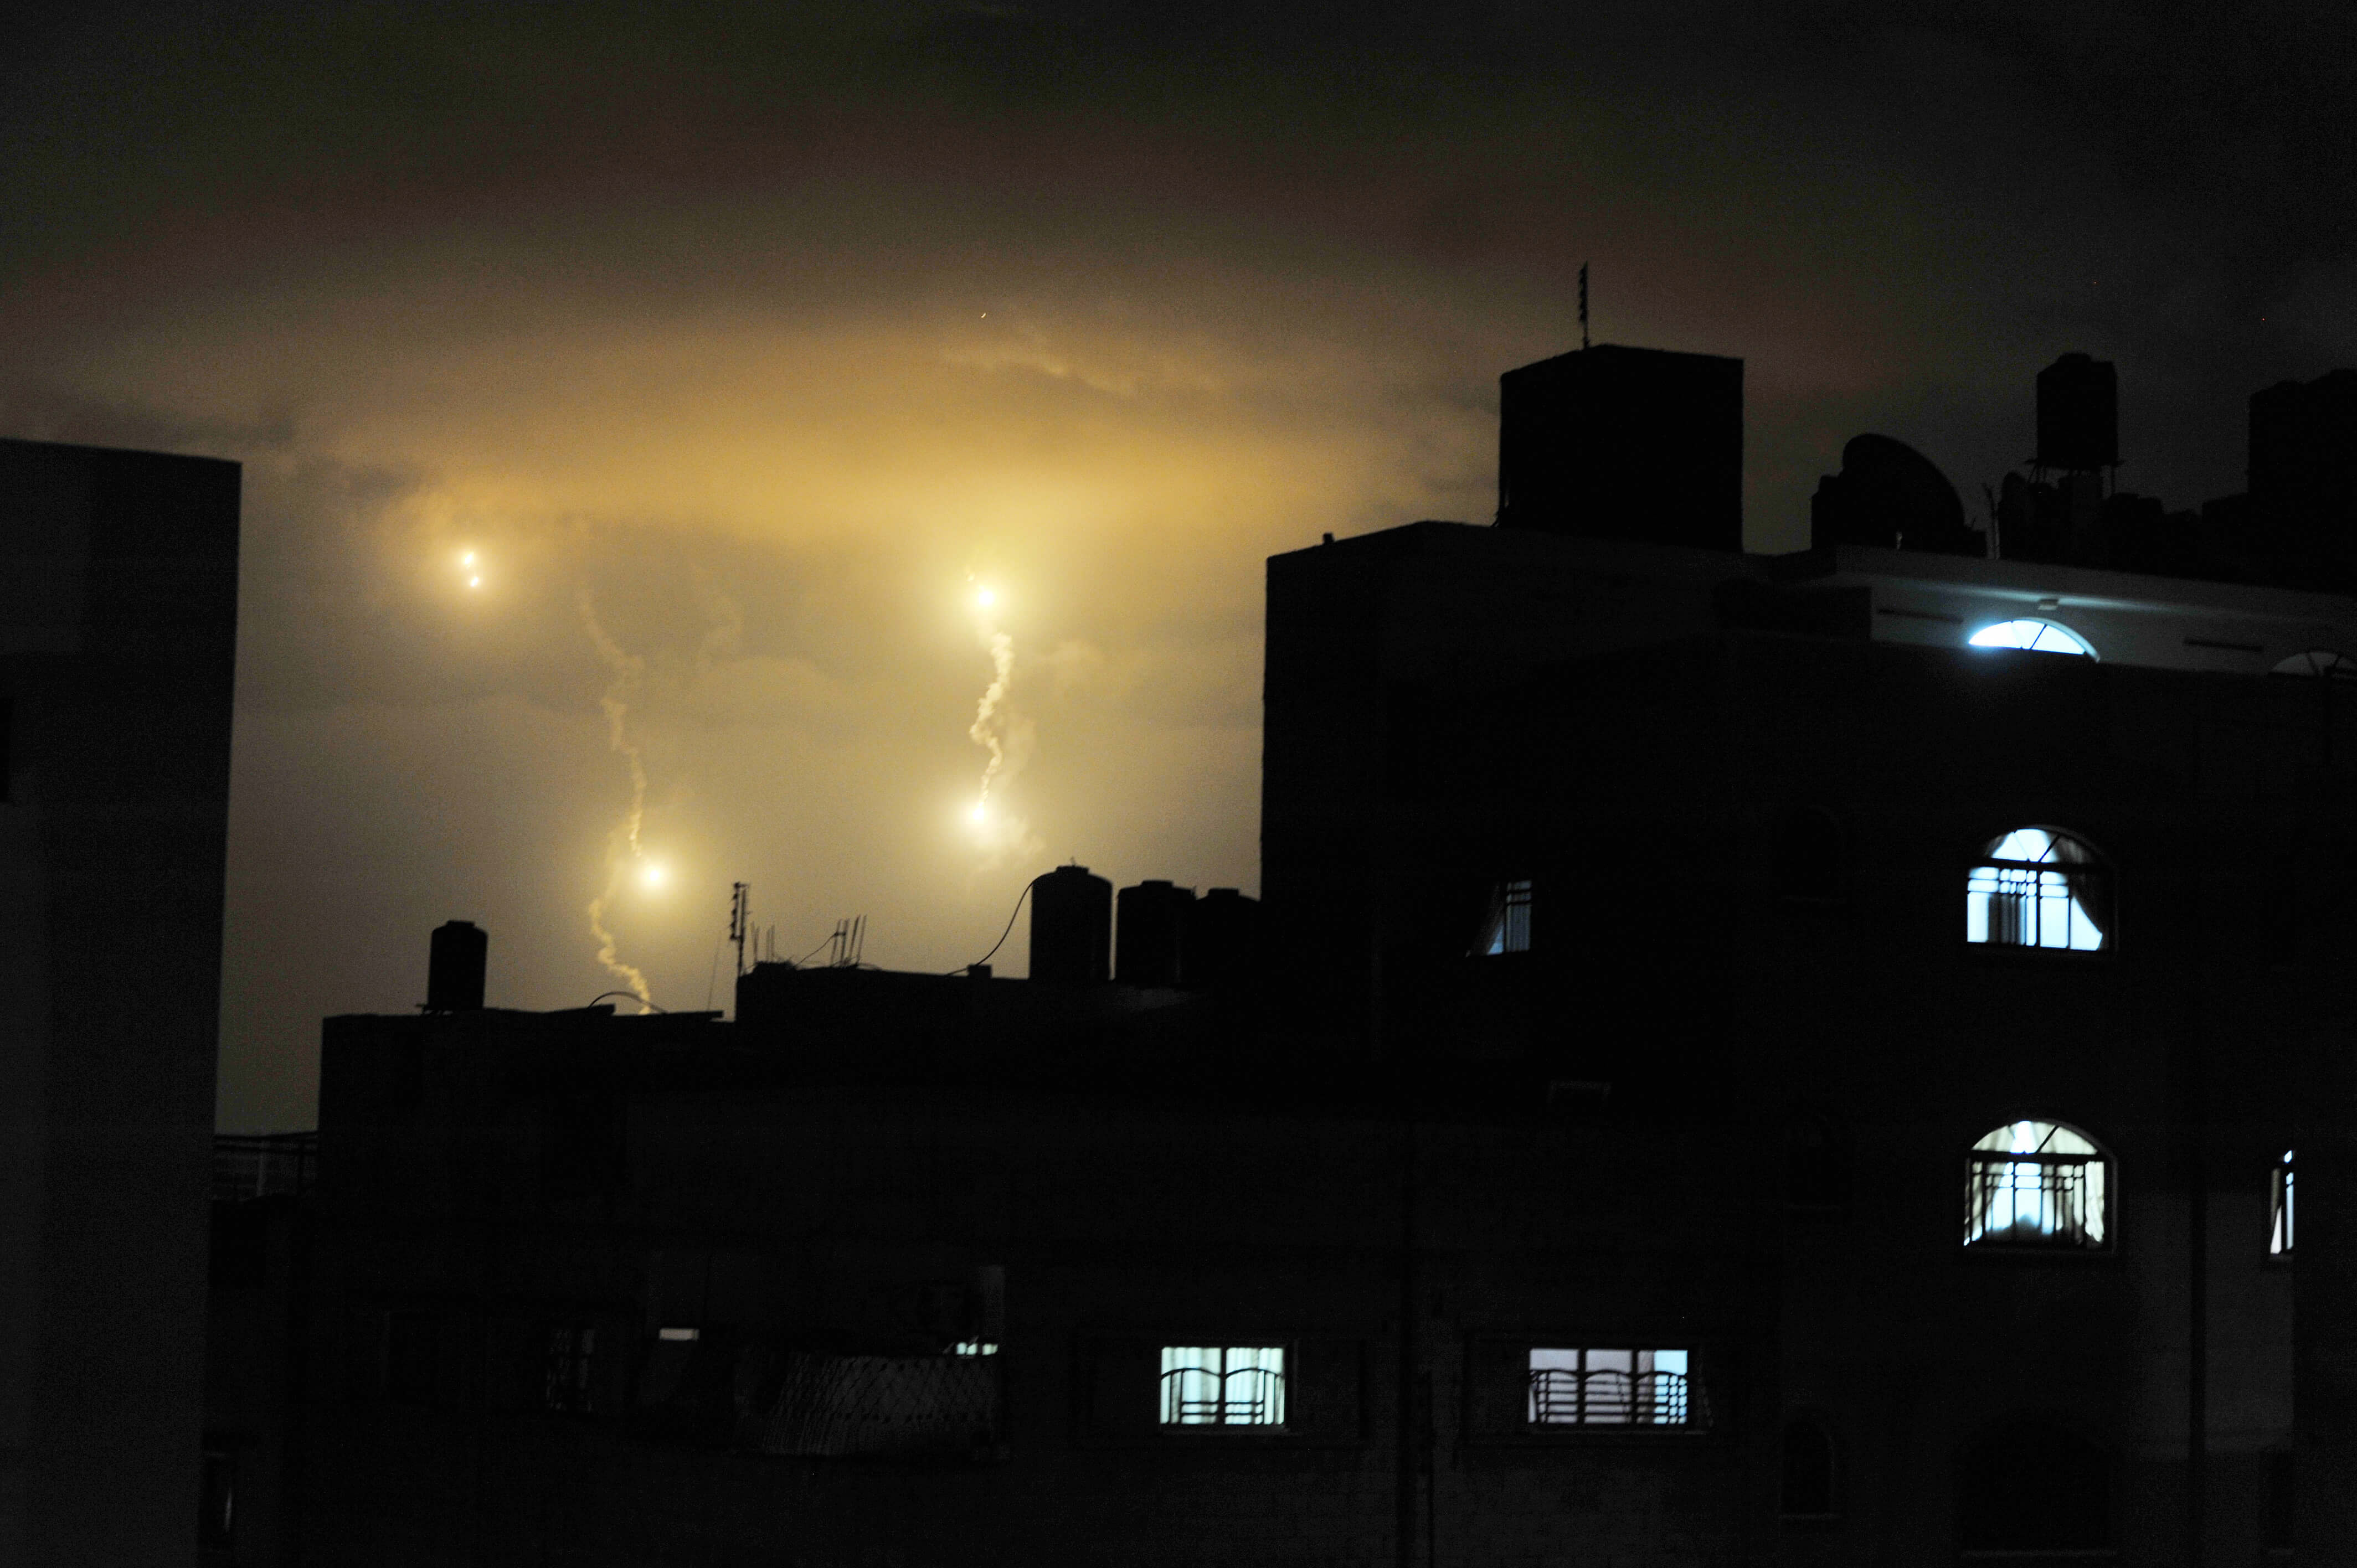 Flares from Israeli forces light up the night sky of Gaza City in the course of the hostilities in the Gaza Strip in July 2014 ©UN Photo/Shareef Sarhan